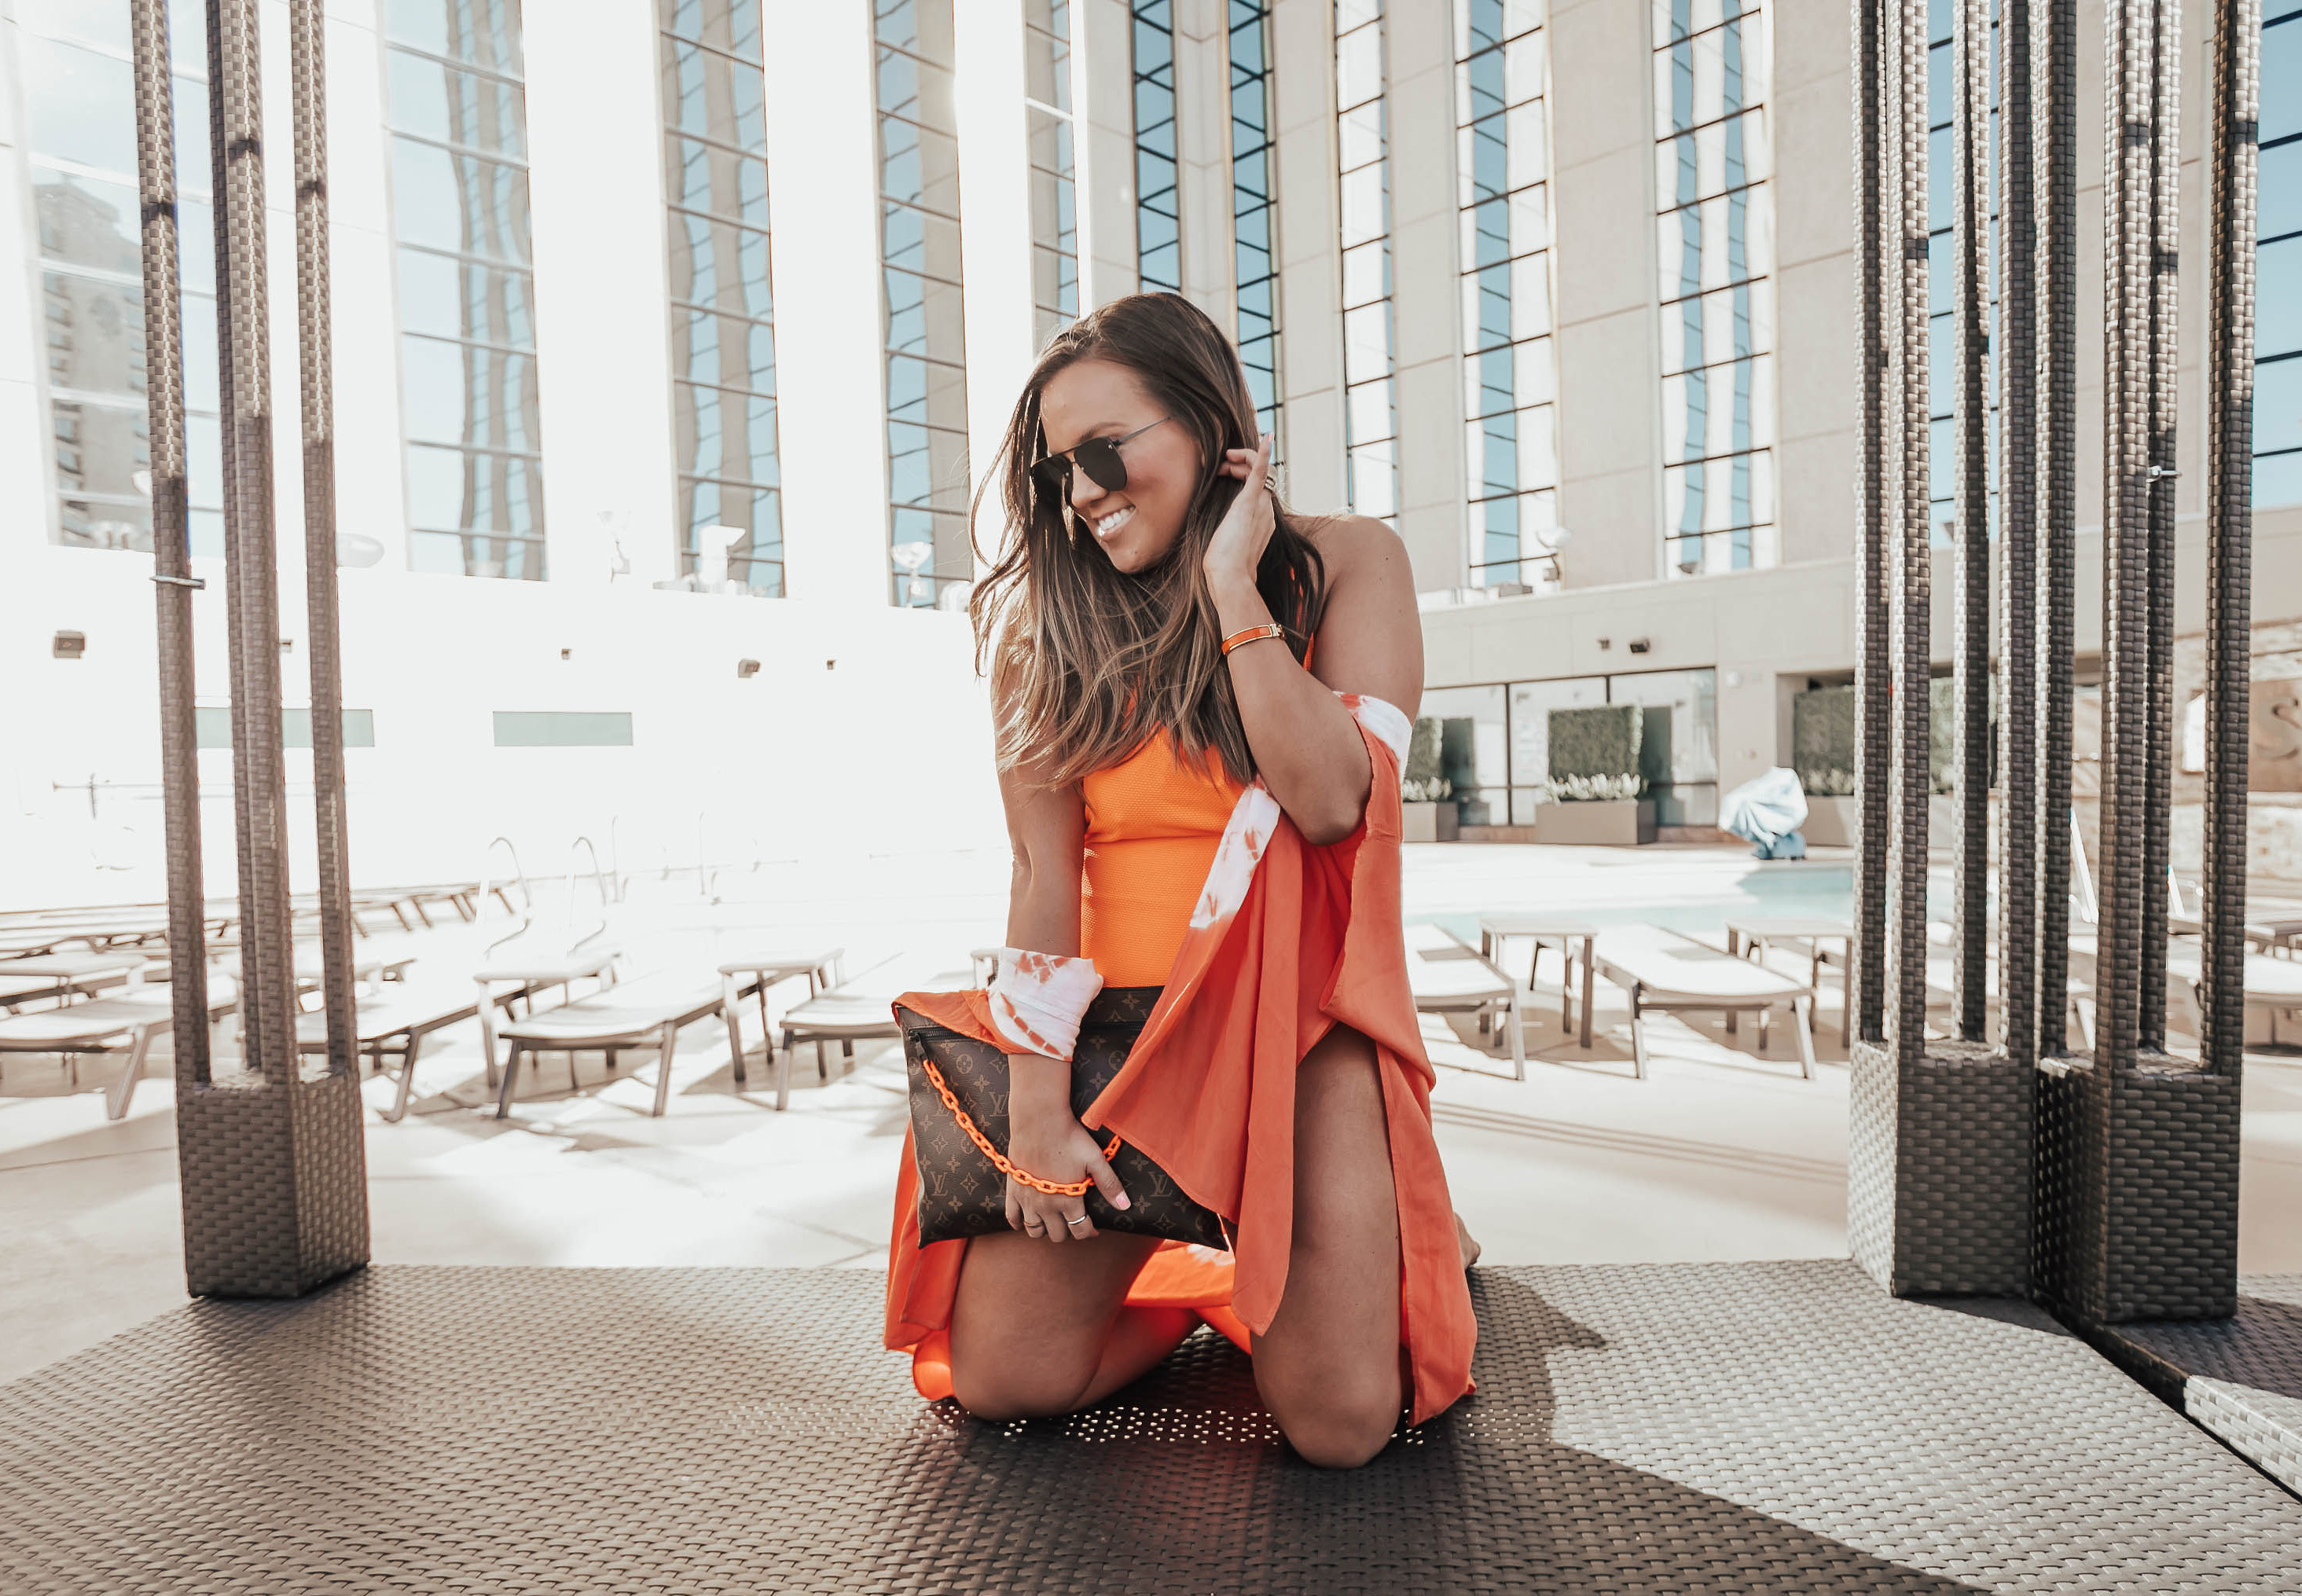 Reno fashion blogger Ashley Zeal from Two Peas in a Prada shares her favorite swimsuits for spring break 2020. They are all super flattering and affordable! 